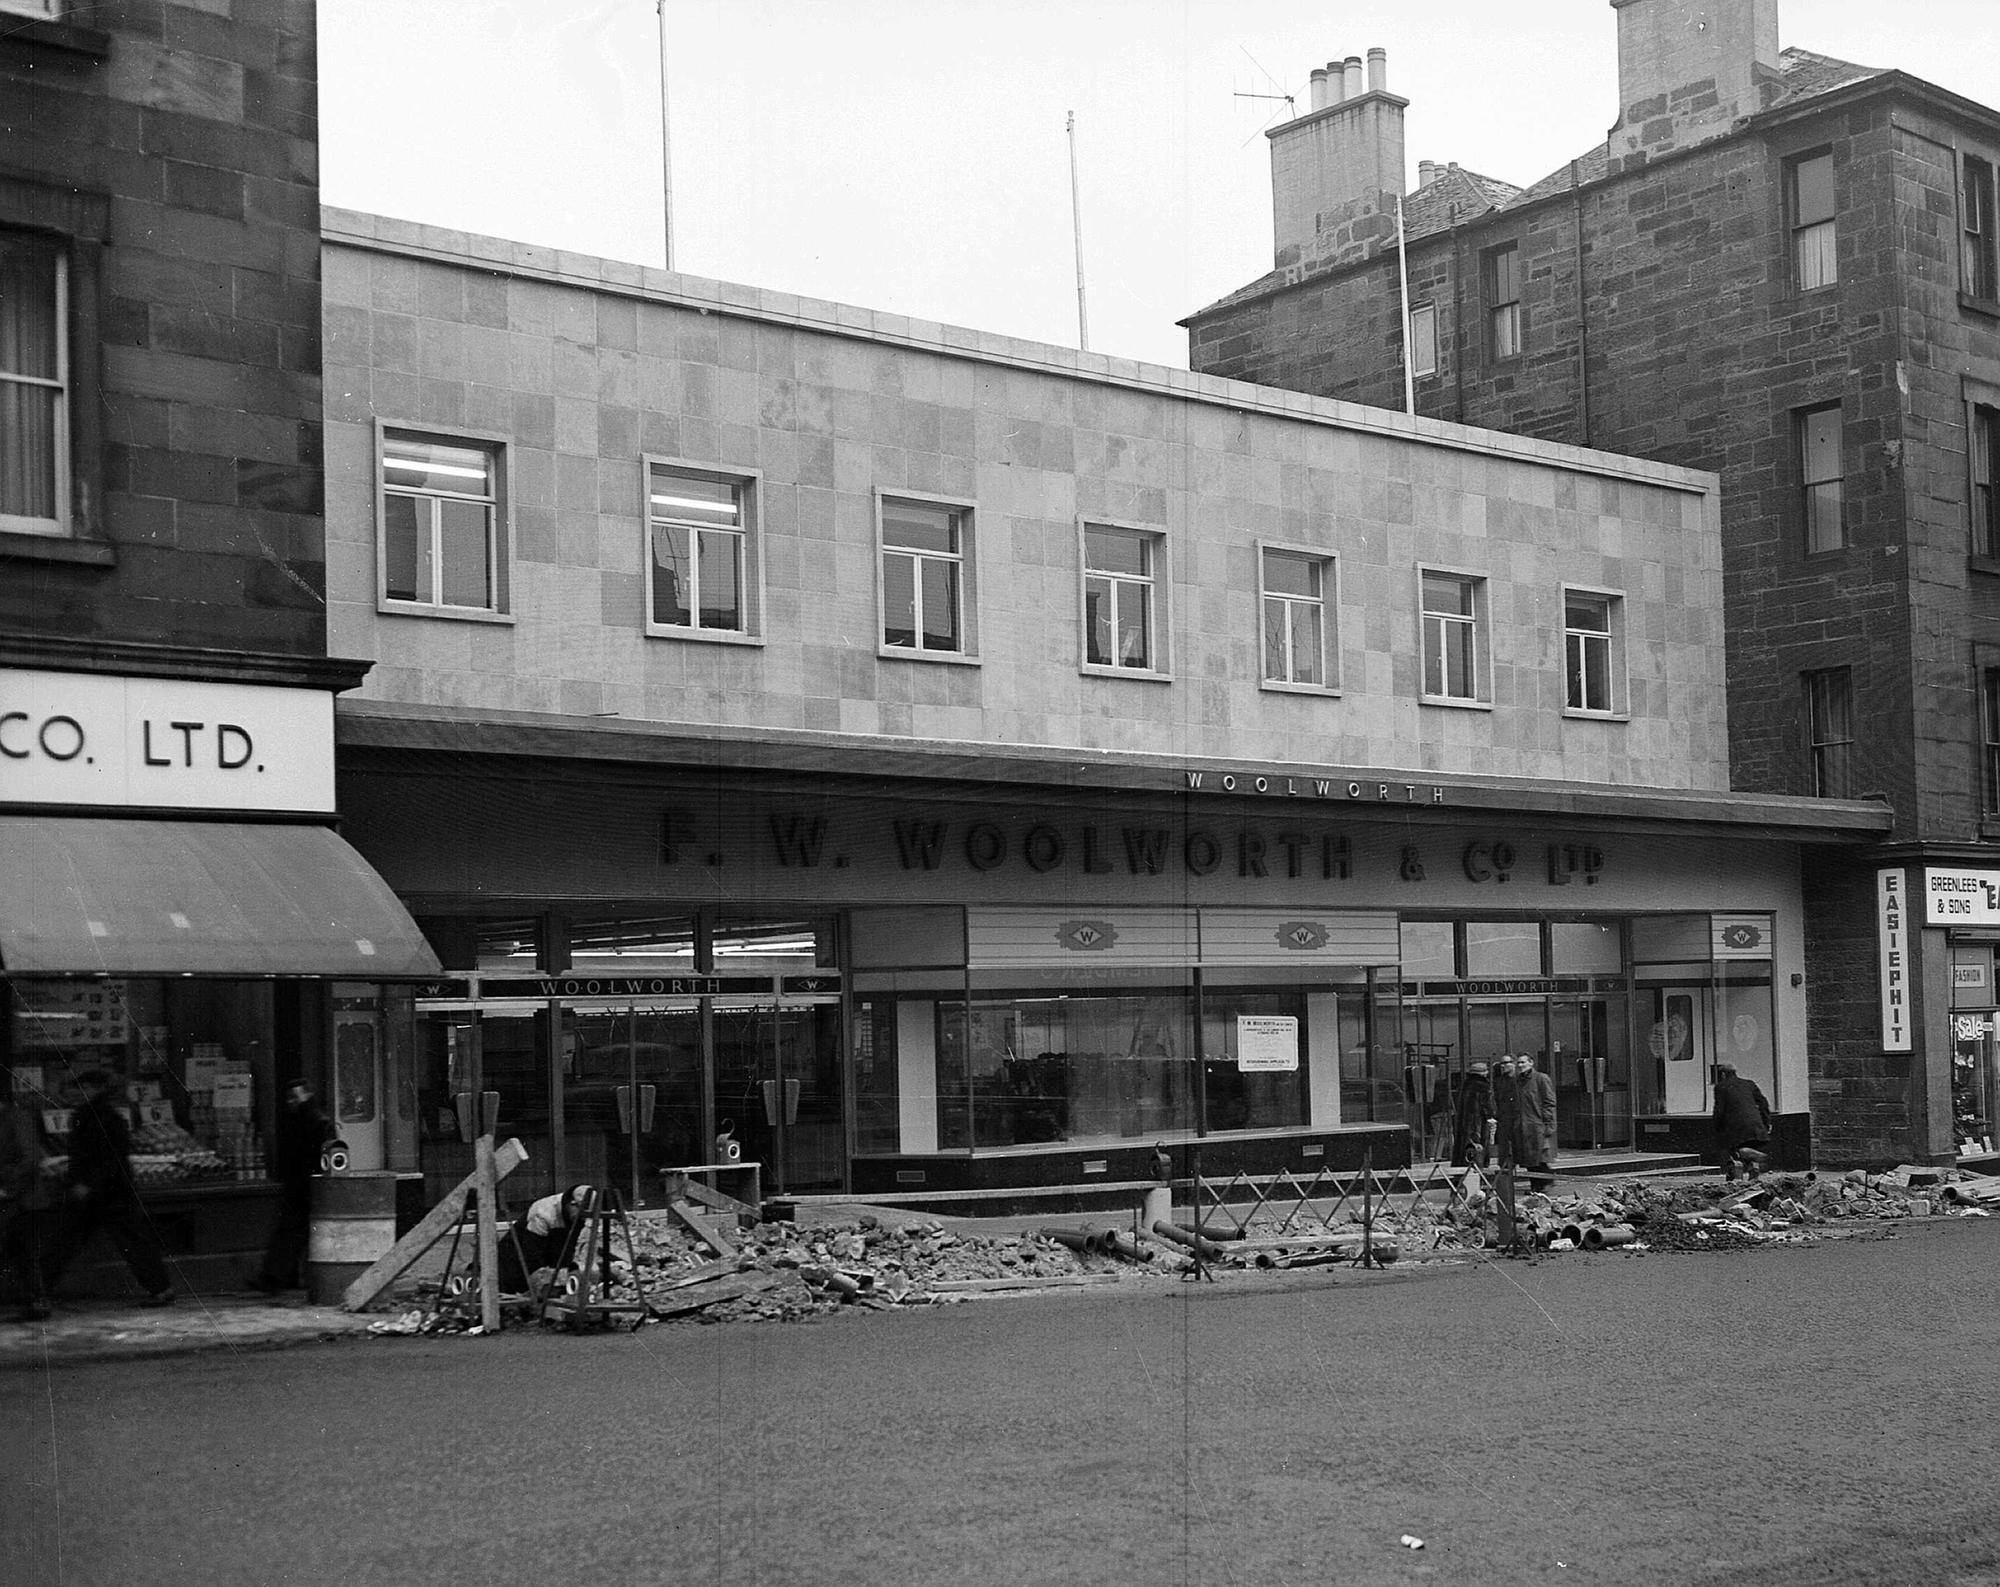 edinburgh retro: 17 photos of edinburgh's lost woolworths stores as iconic brand gears up for shock comeback